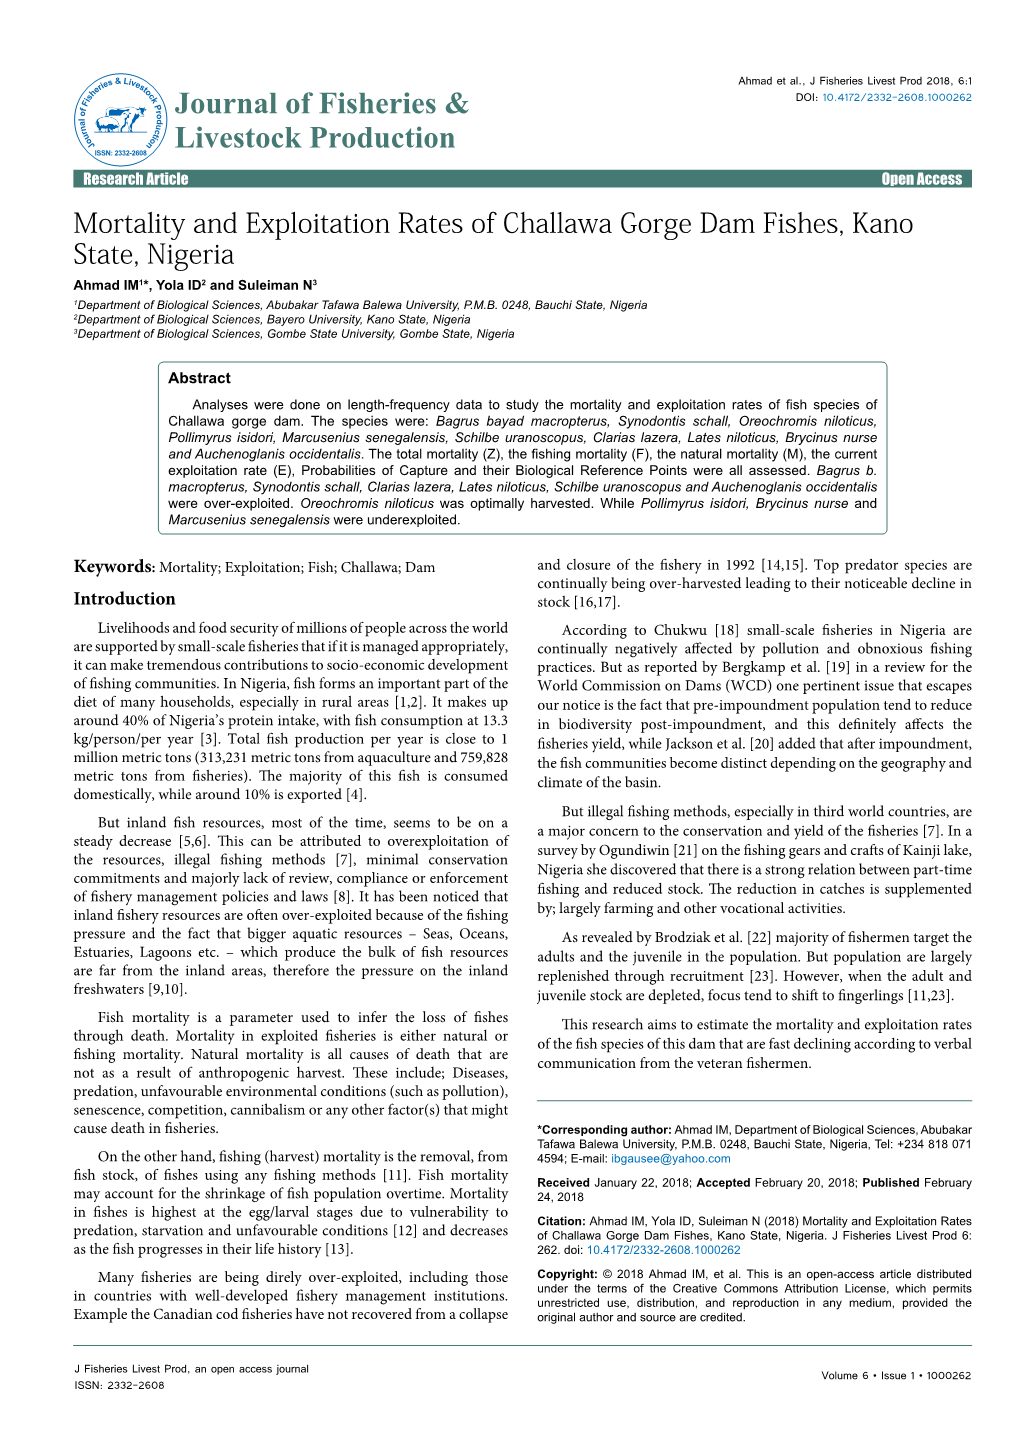 Mortality and Exploitation Rates of Challawa Gorge Dam Fishes, Kano